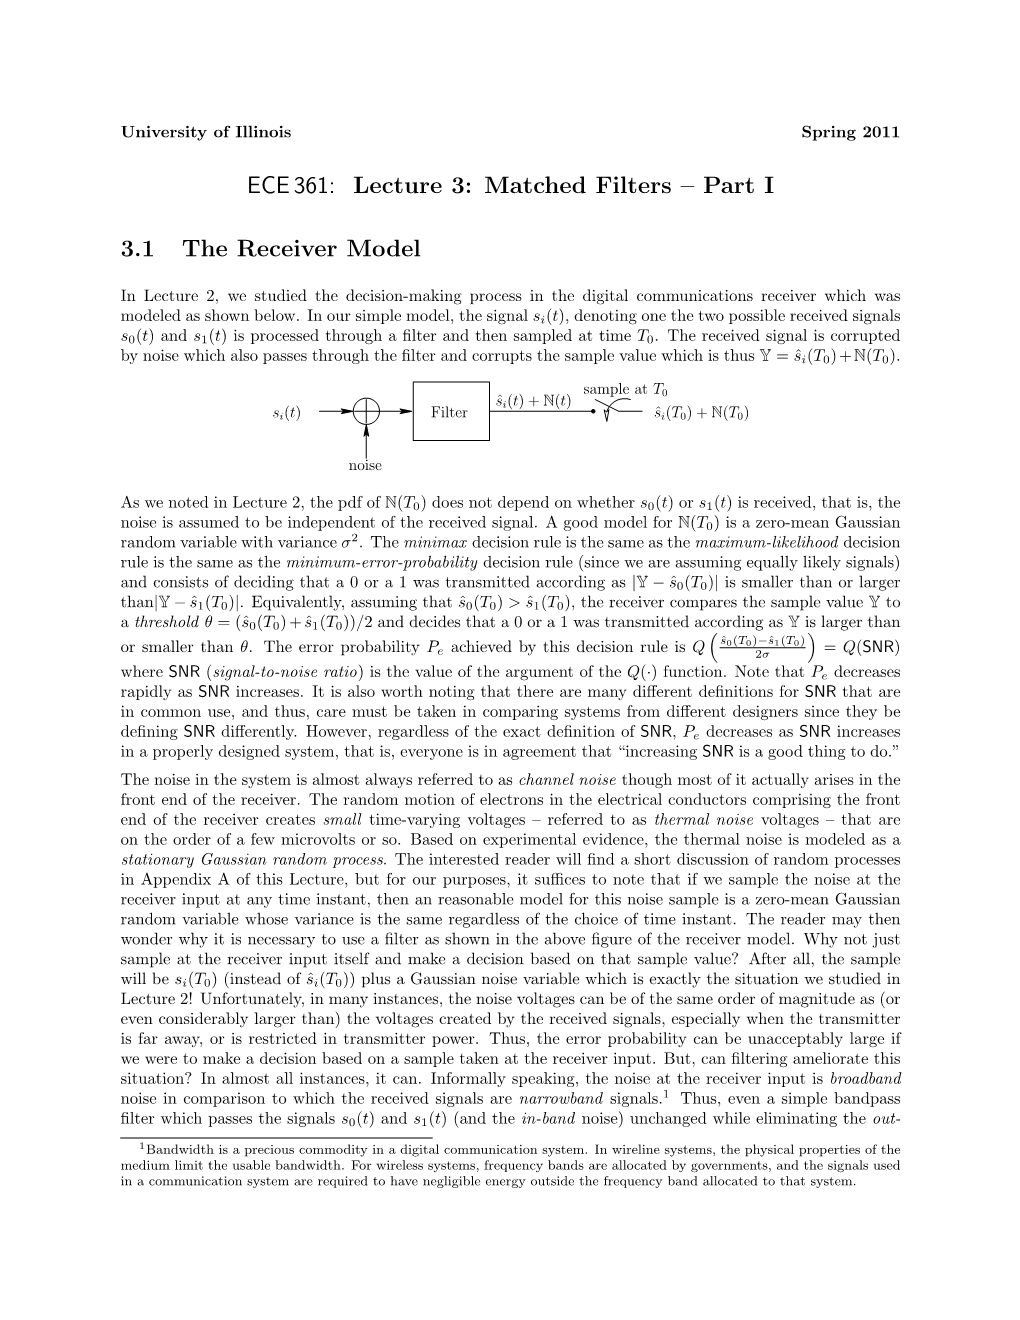 ECE 361: Lecture 3: Matched Filters – Part I 3.1 the Receiver Model